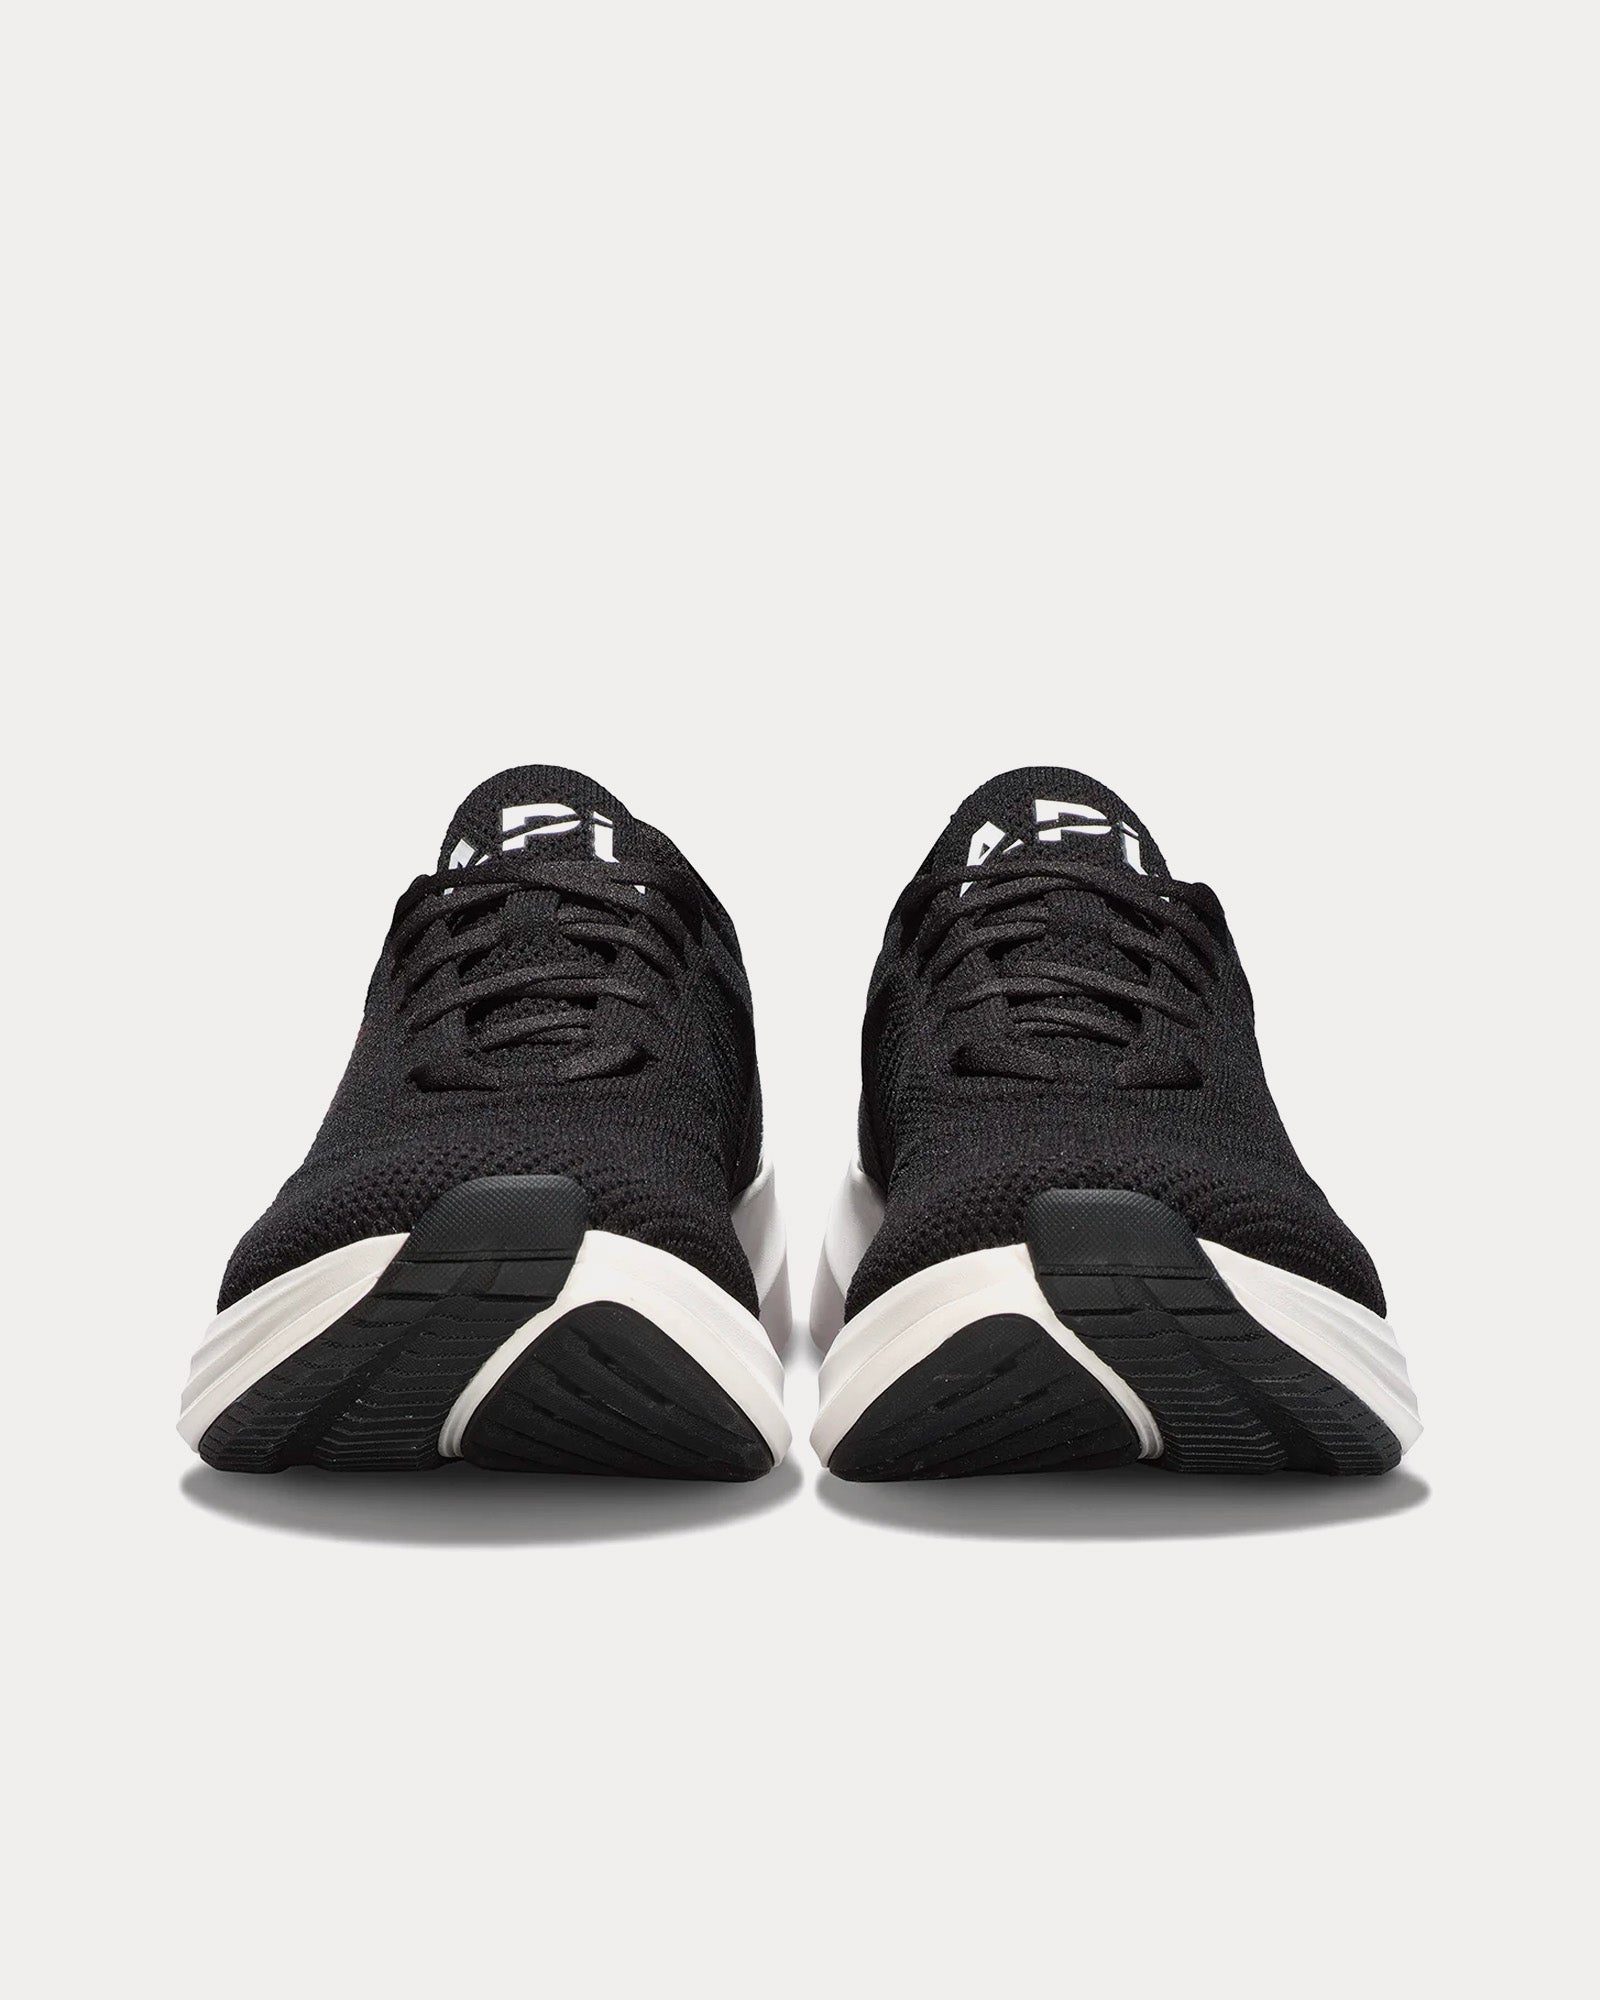 Athletic Propulsion Labs - TechLoom Dream Black / White Running Shoes